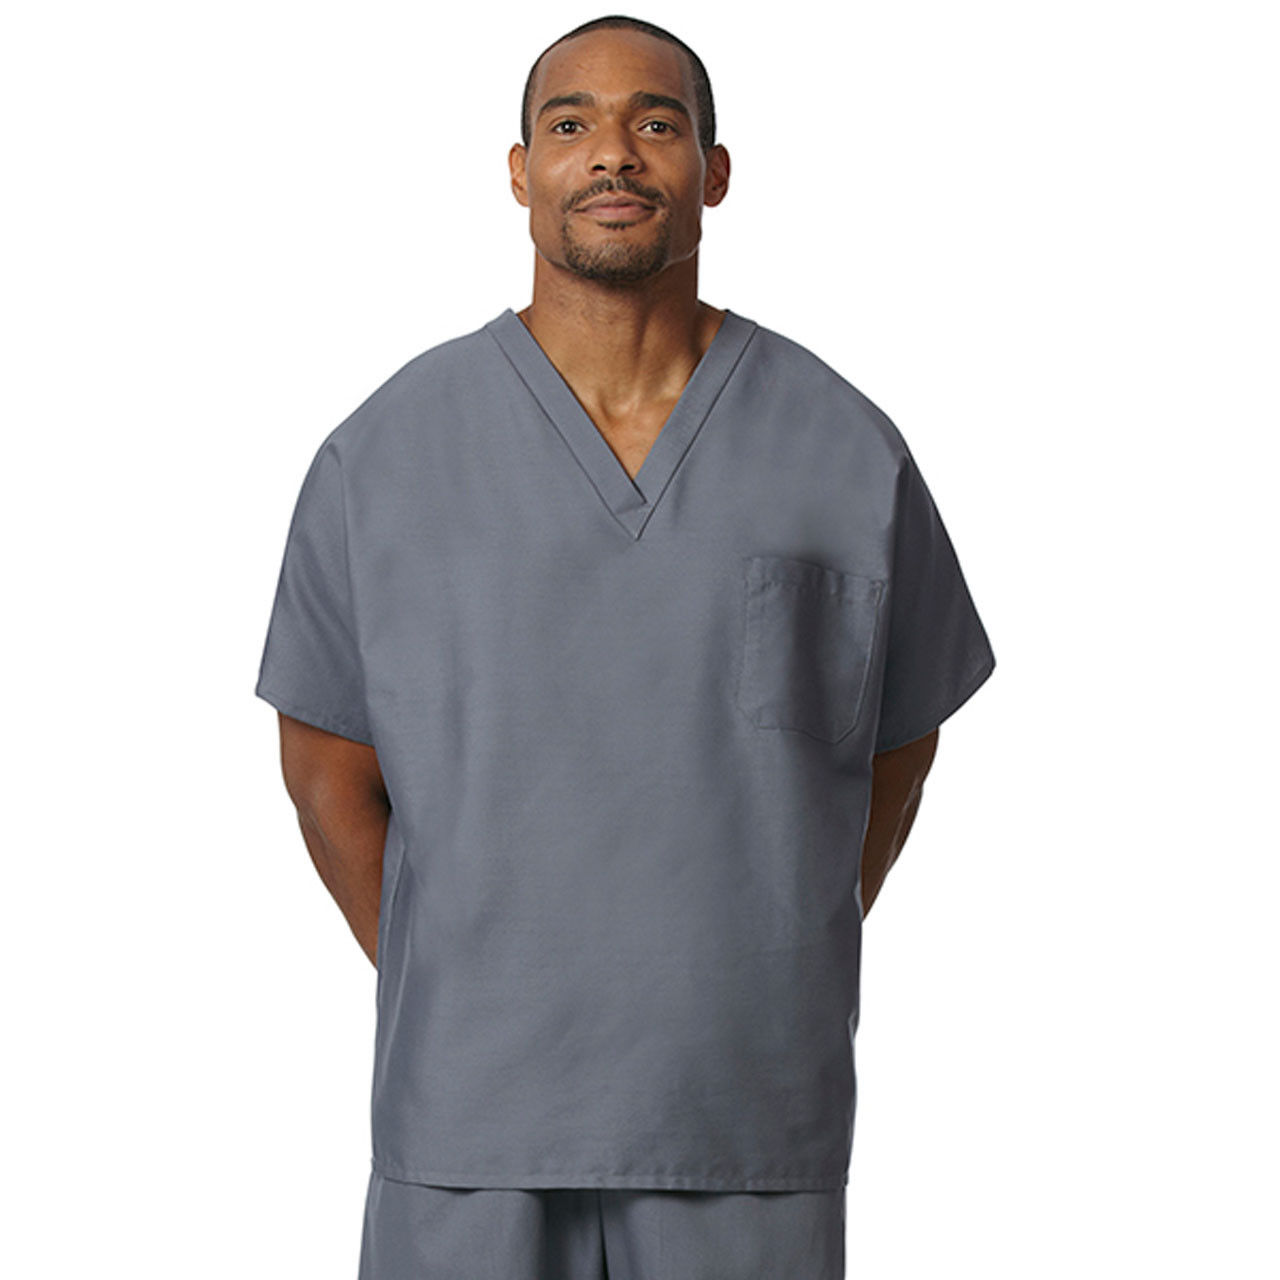 What industries are the Gray Scrub Tops suitable for?